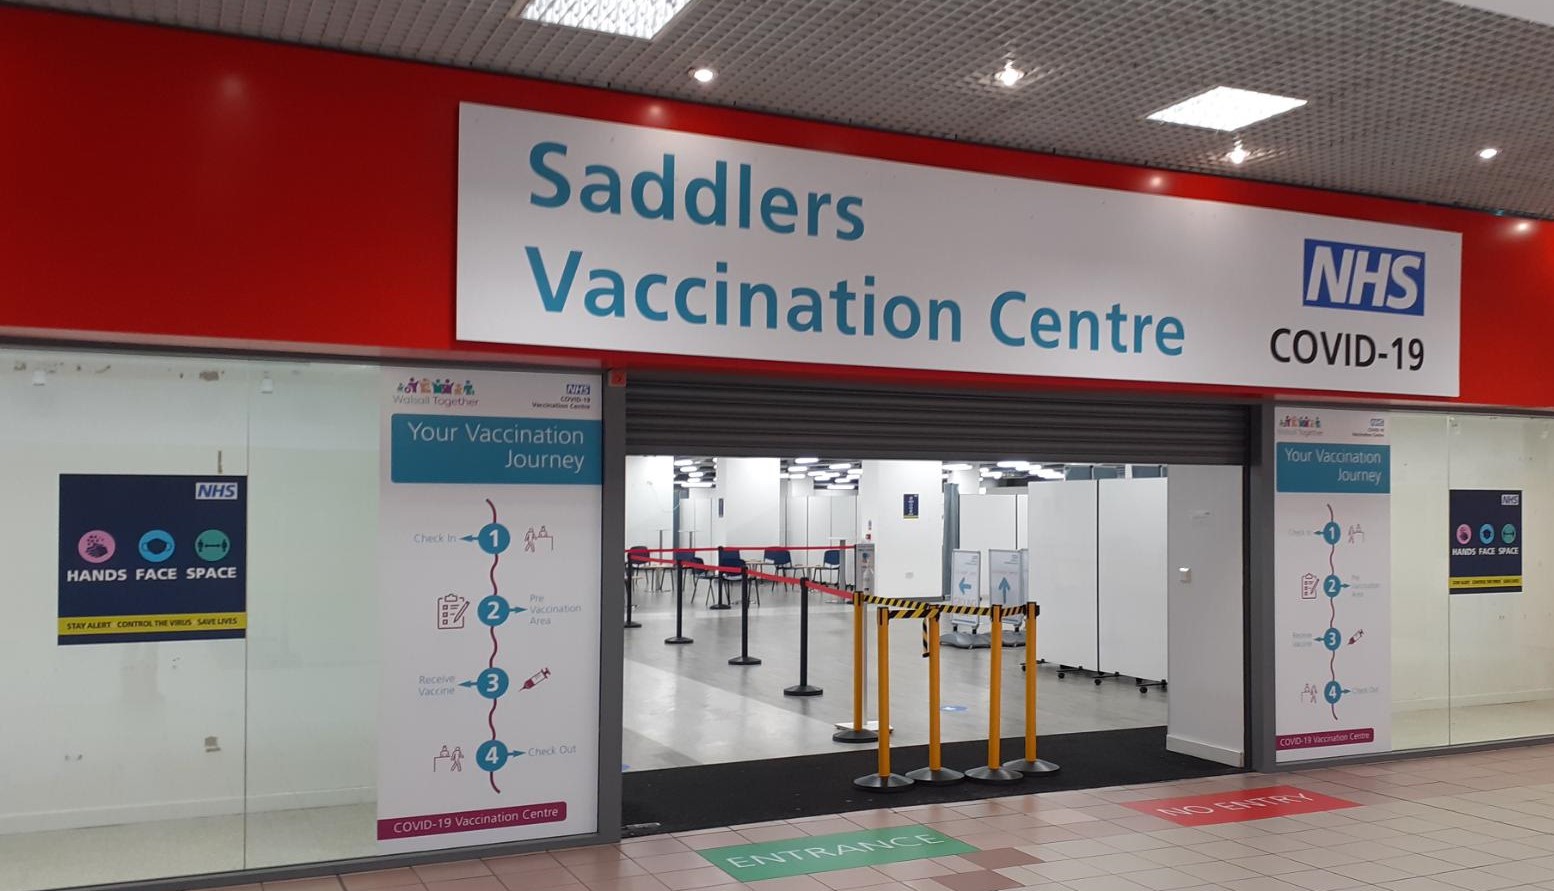 an image of saddlers vaccination centre in Walsall